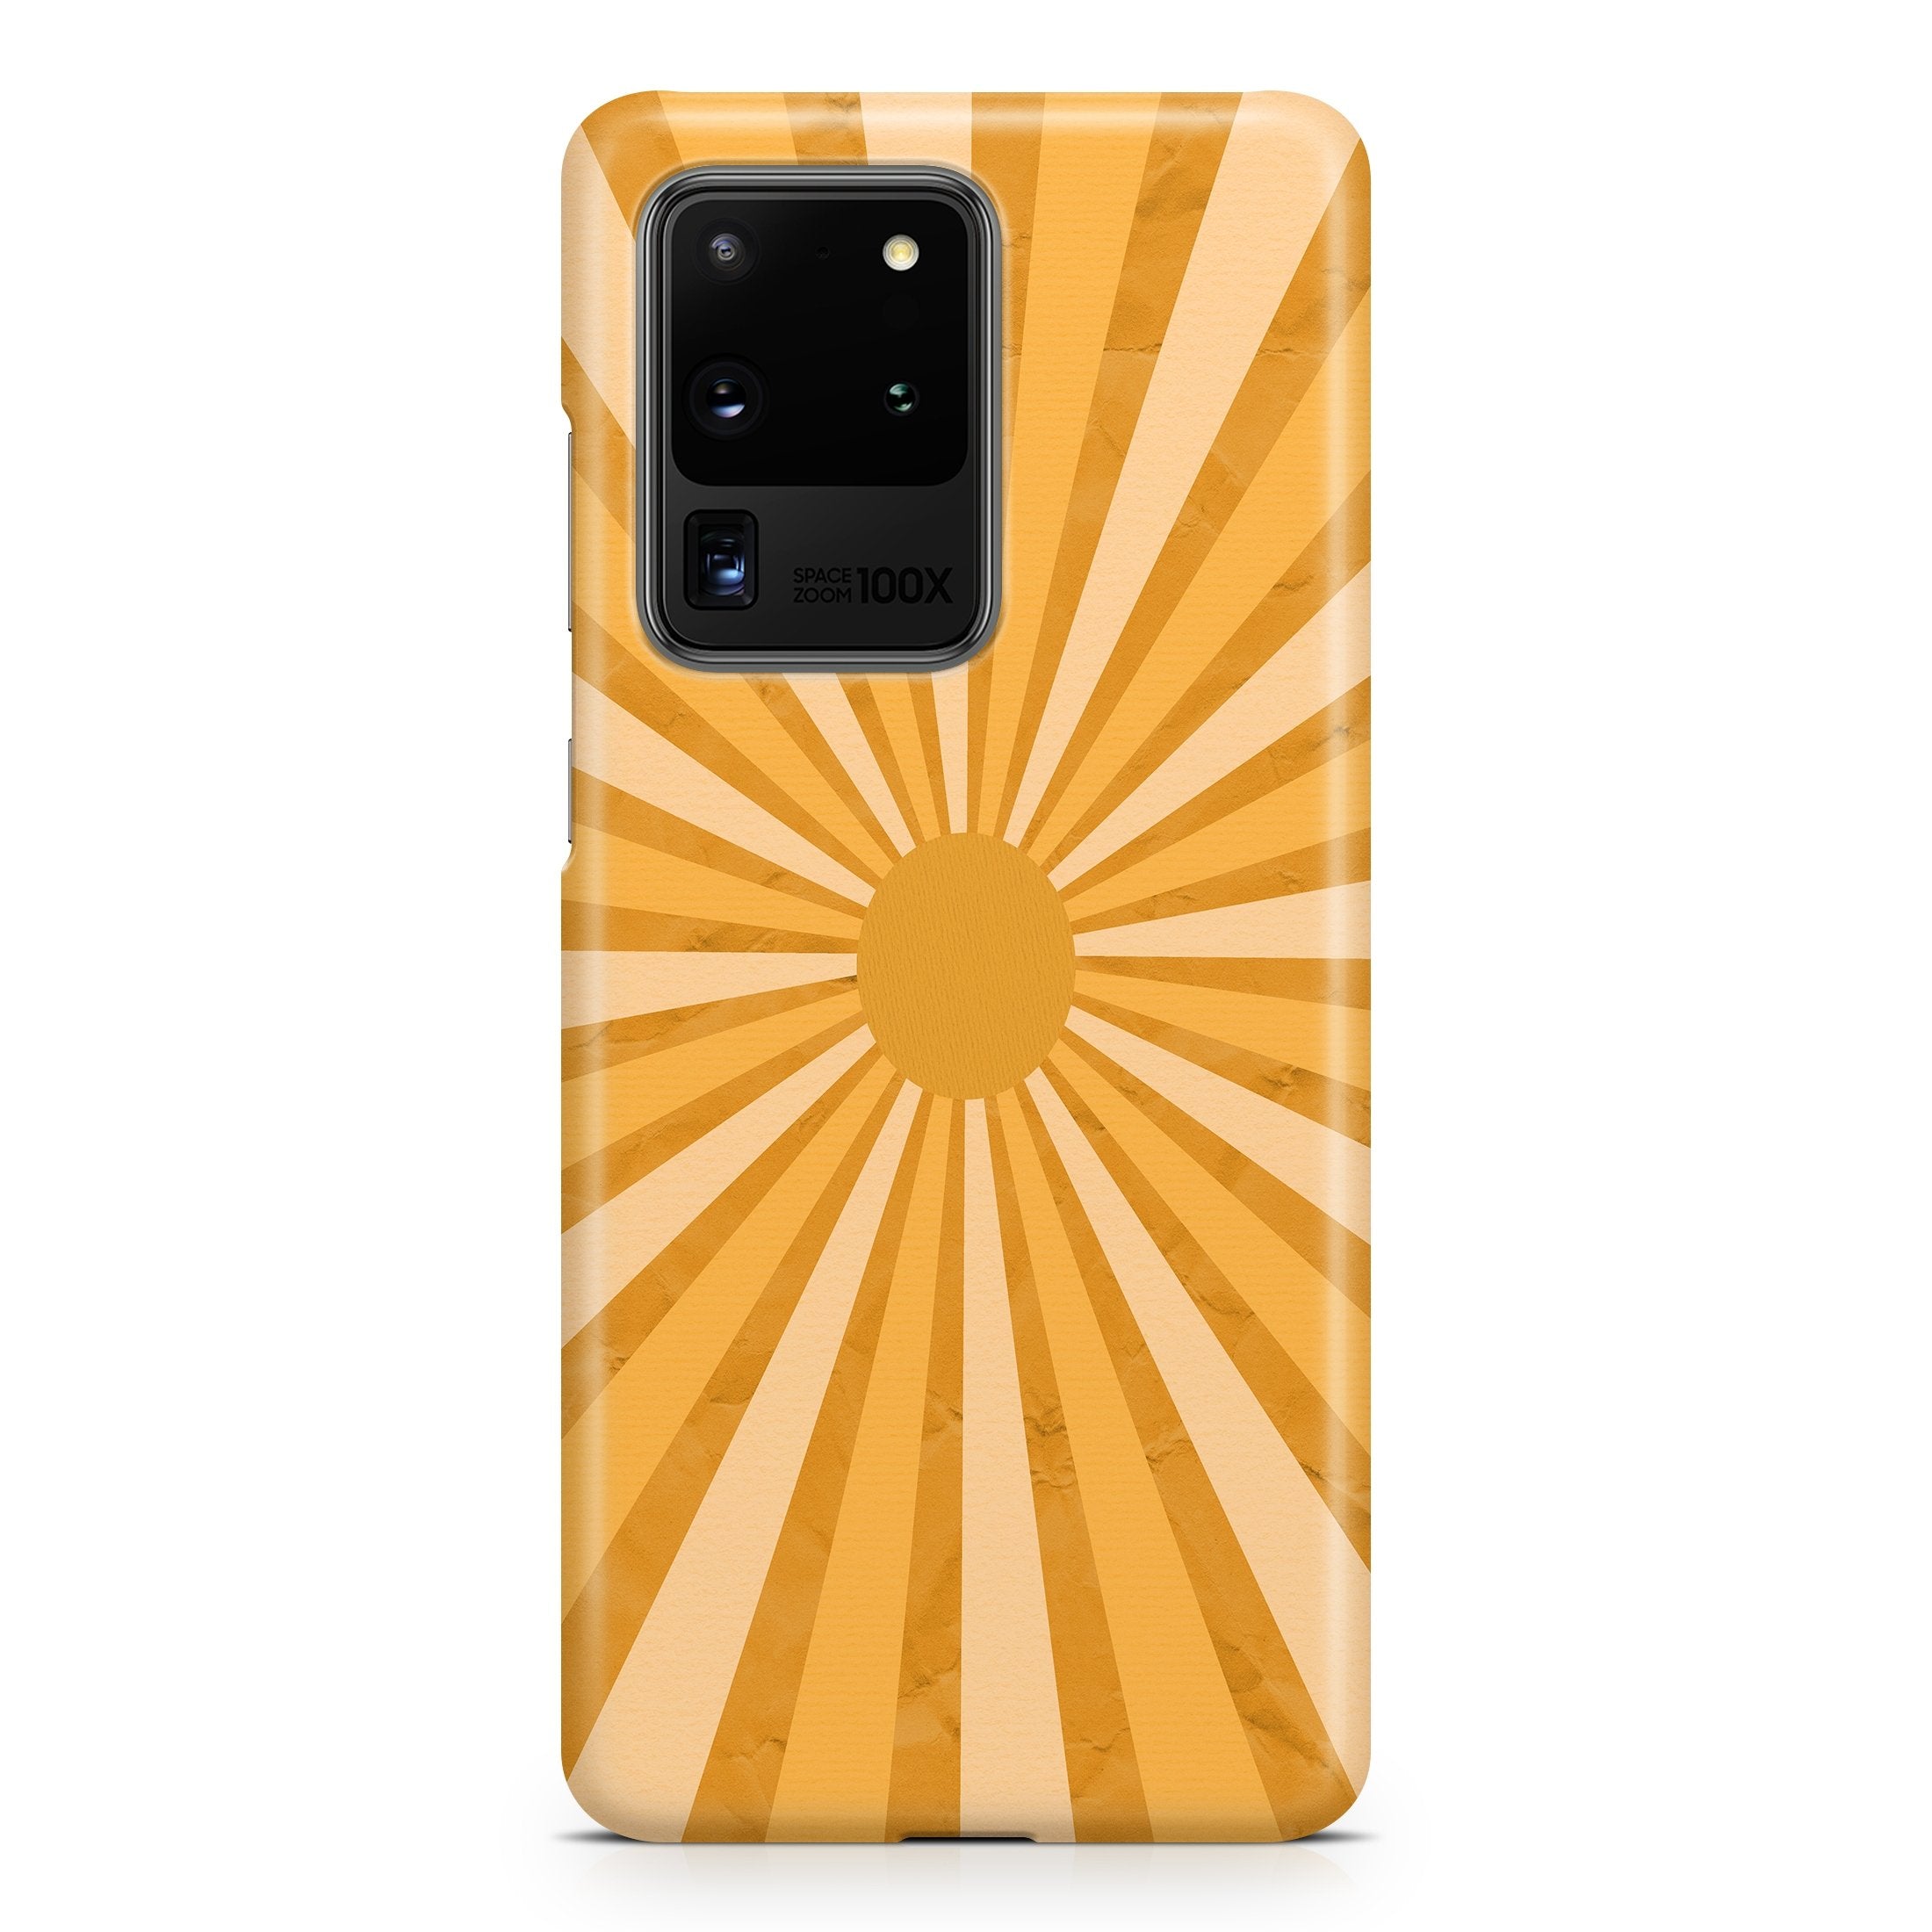 Retro Sunlight - Samsung phone case designs by CaseSwagger